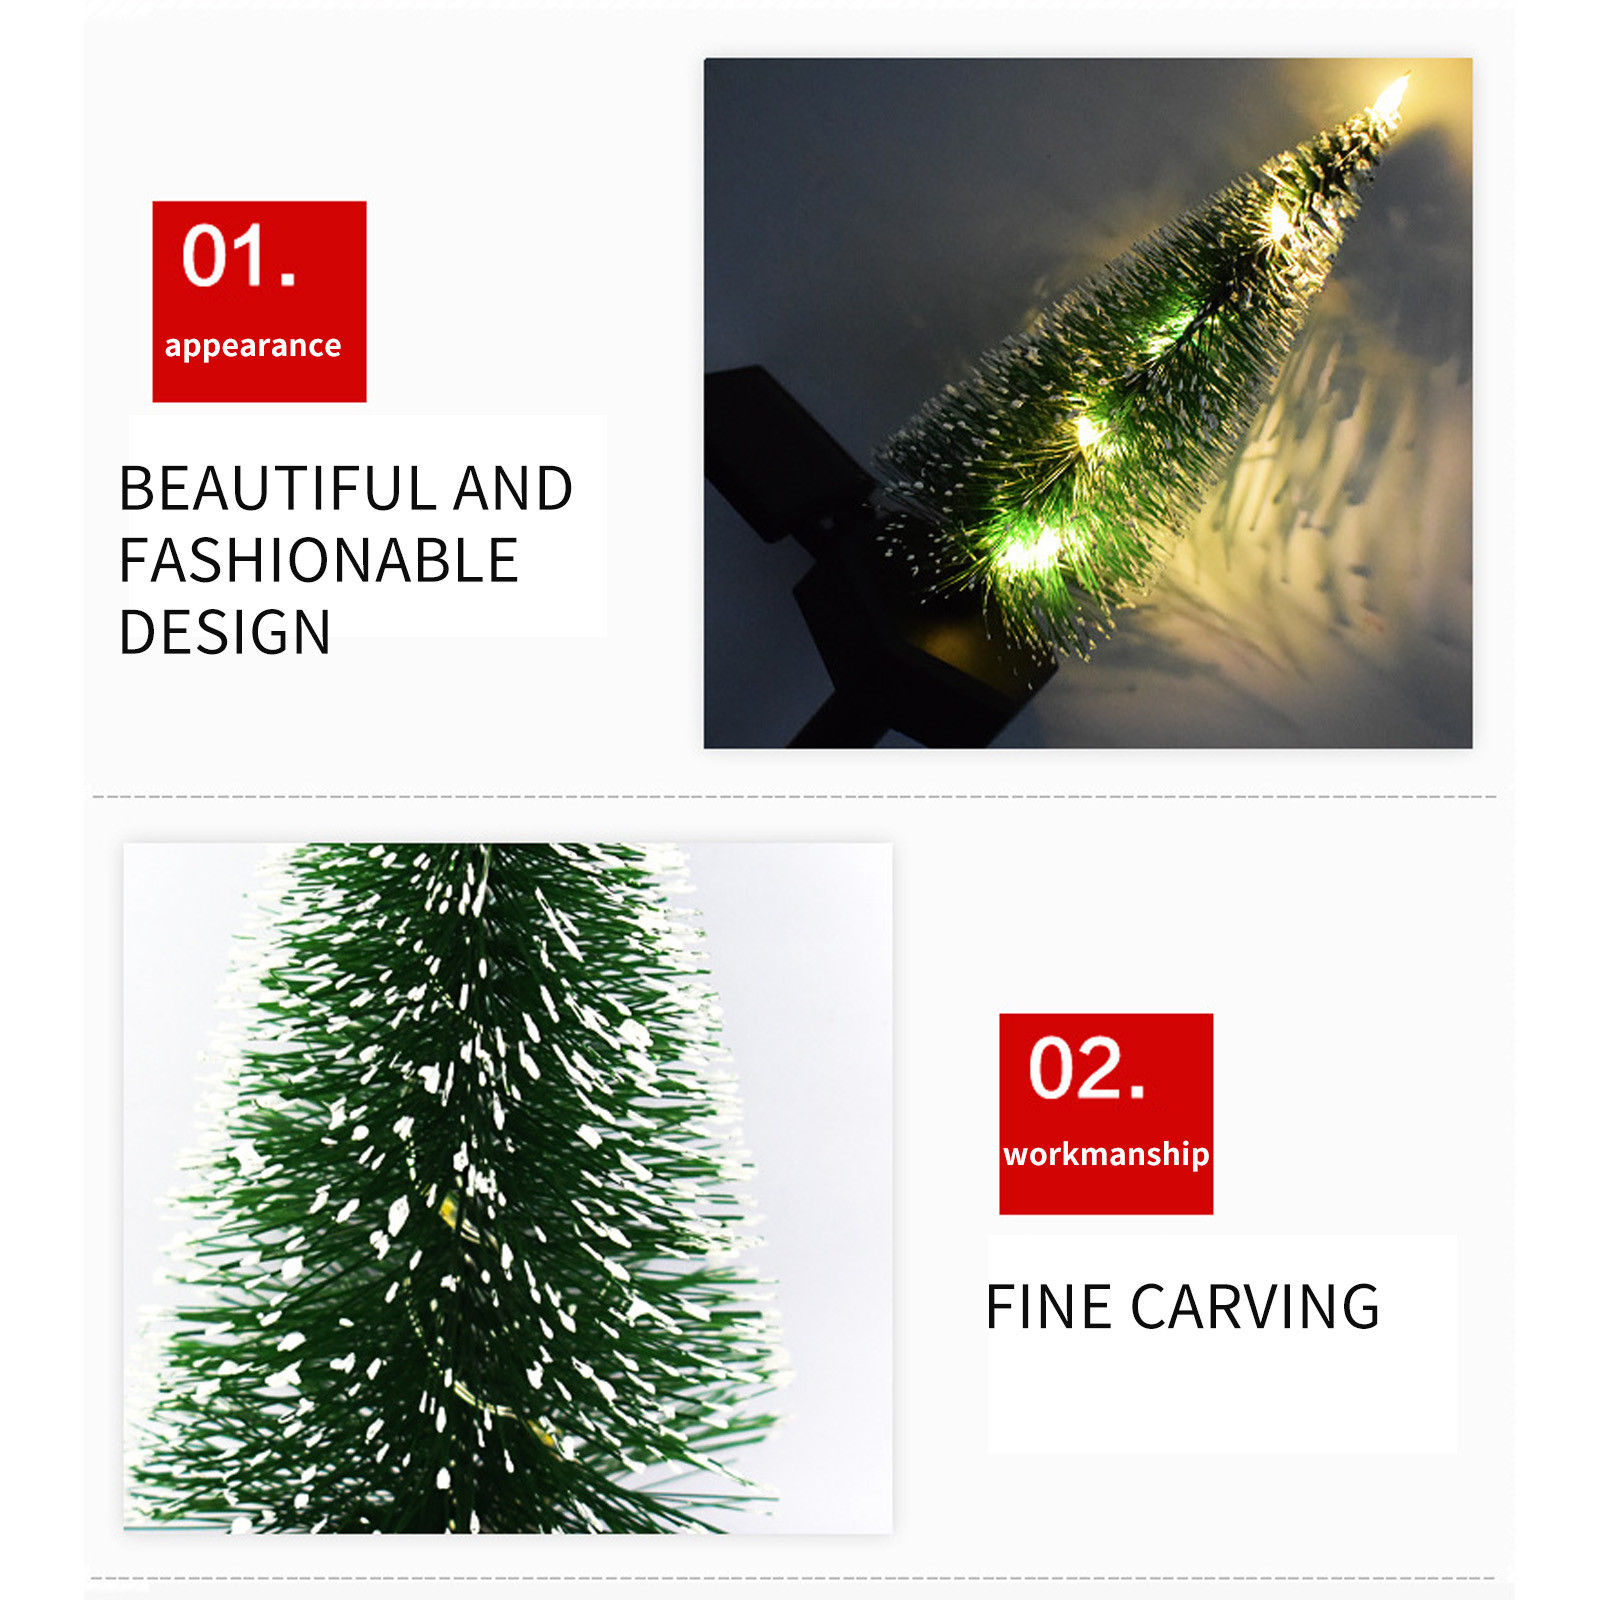 Christmas-Tree-Lights-Led-Solar-Light-For-Garden-Decoration-Lawn-Lamp-Outdoor-Home-Pathway-Bulb-Wate-1918433-4